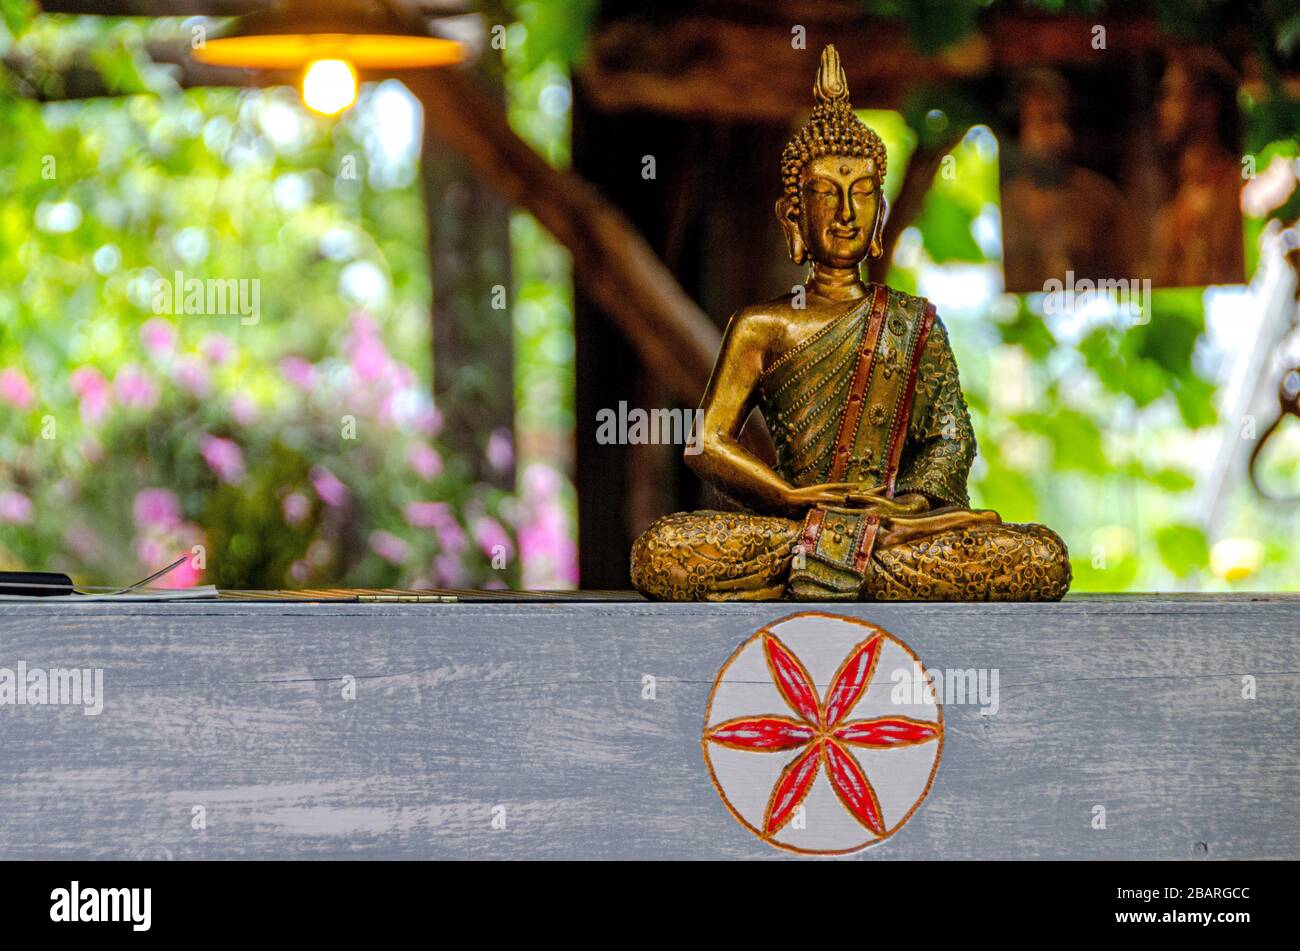 A bronze Buddha statue in the lotus position standing on a wooden, stylish beam in a designer interior Stock Photo